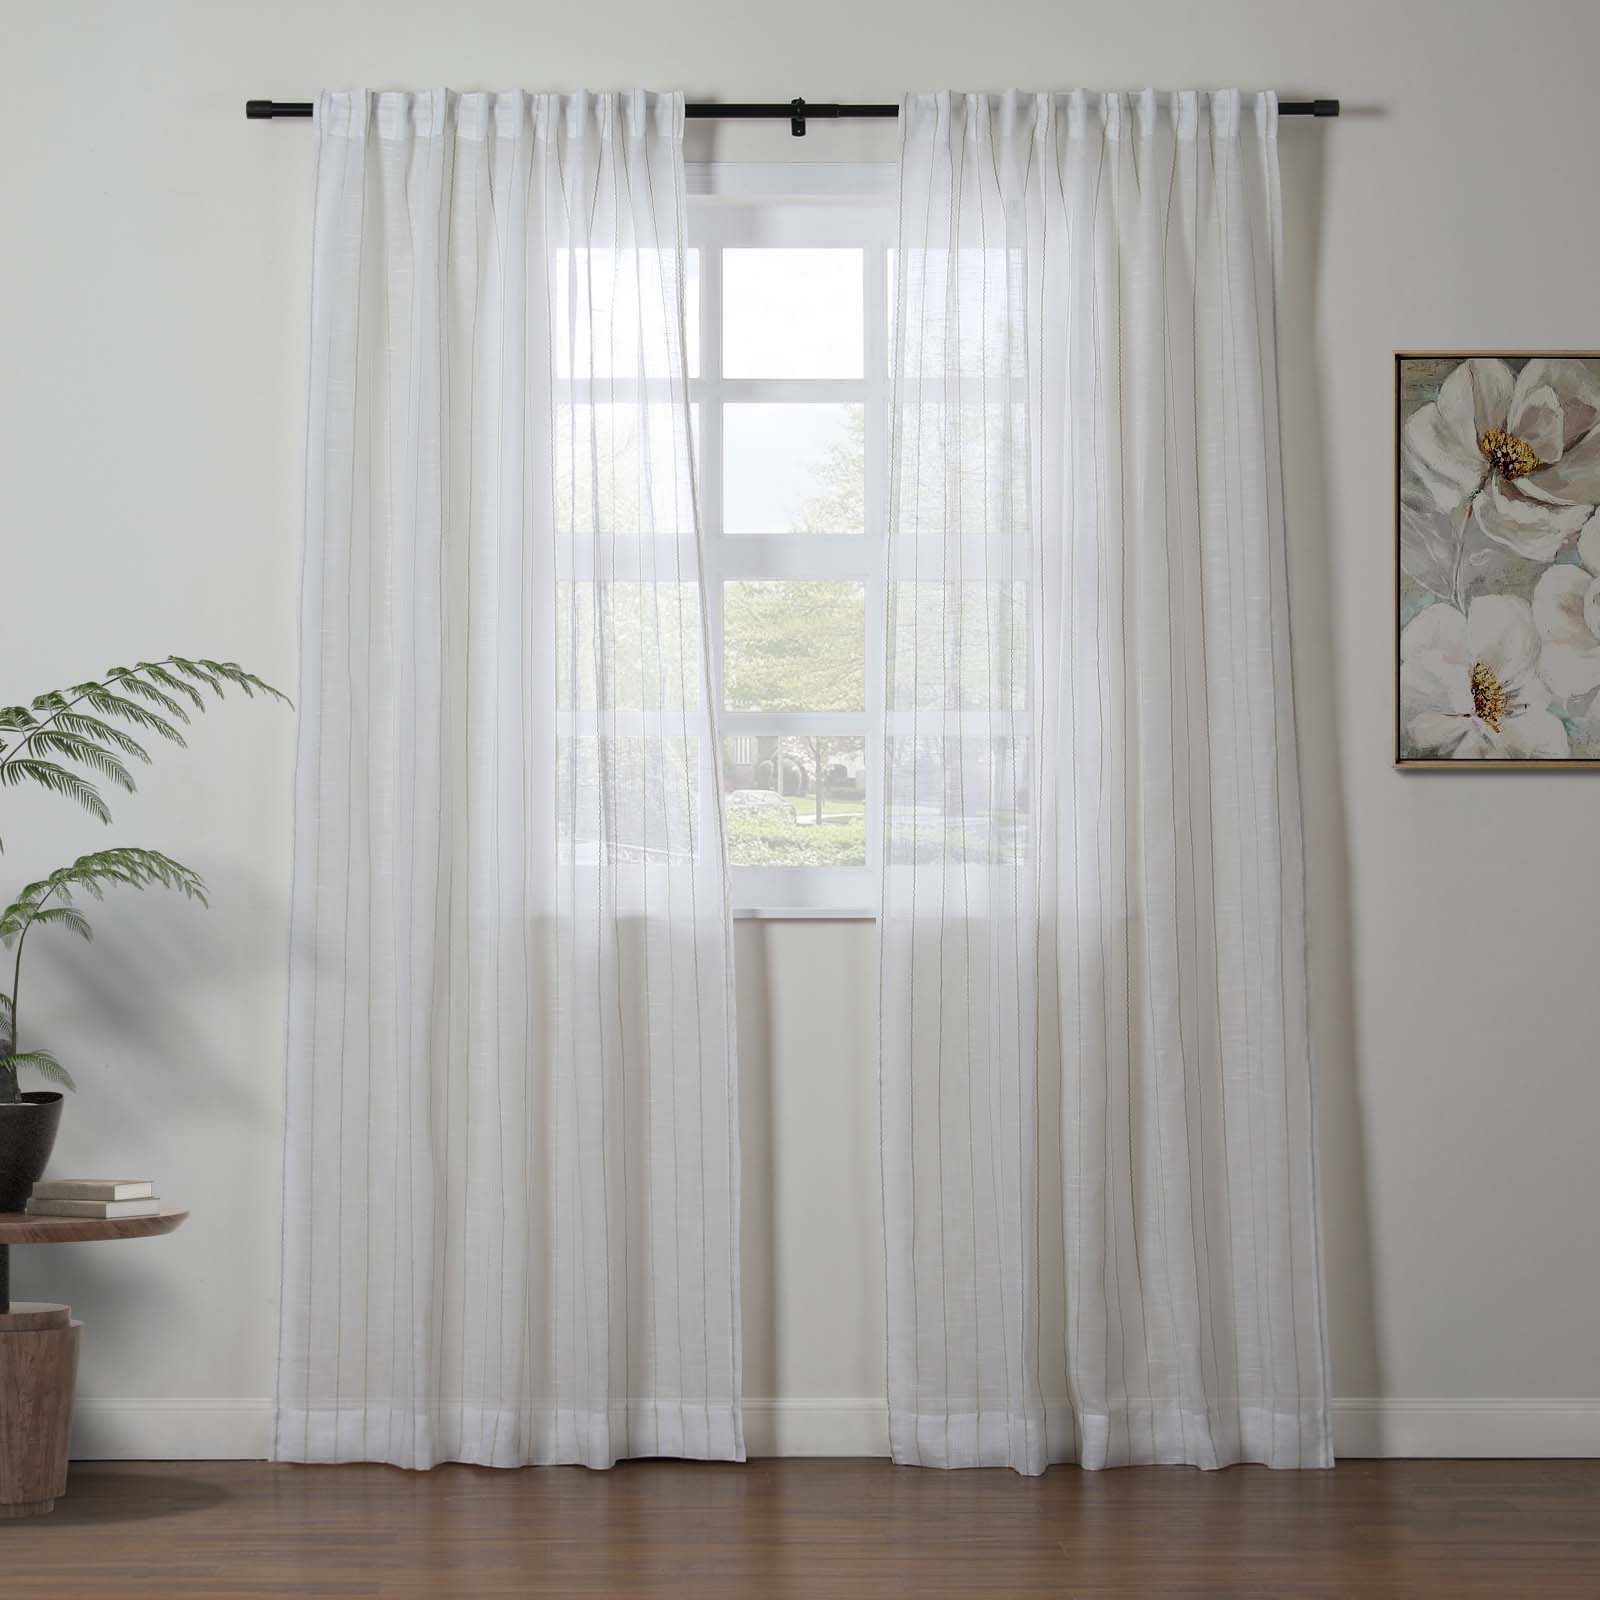 PureEase Woven Striped Sheer Curtain Soft Top